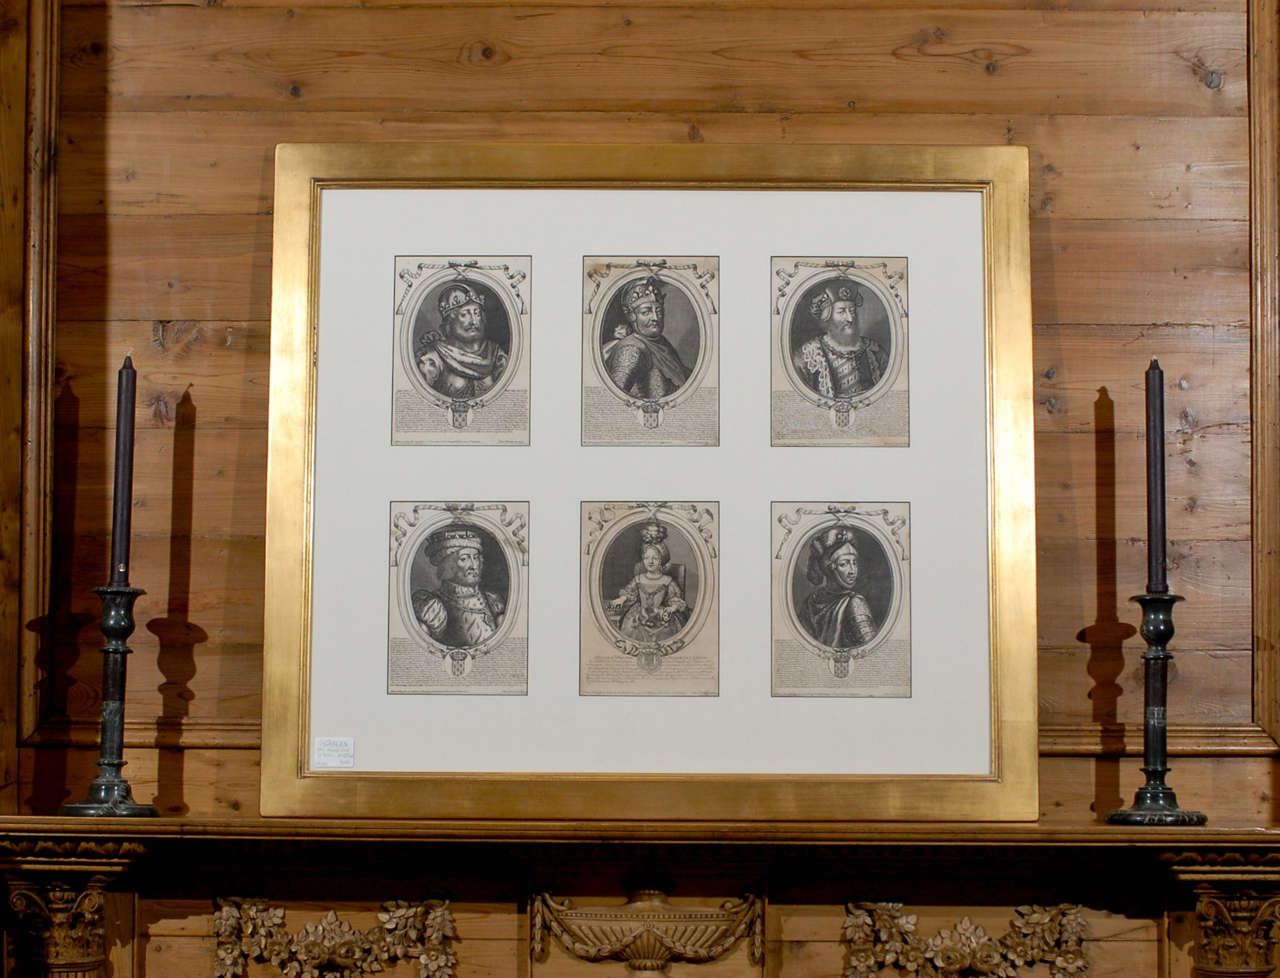 17th Century Engravings of French Kings Framed, Circa 1680
Originally found in books for school children to learn their French history, we have framed this set of six French nobles and kings that were in a 17th century book.  The set includes: